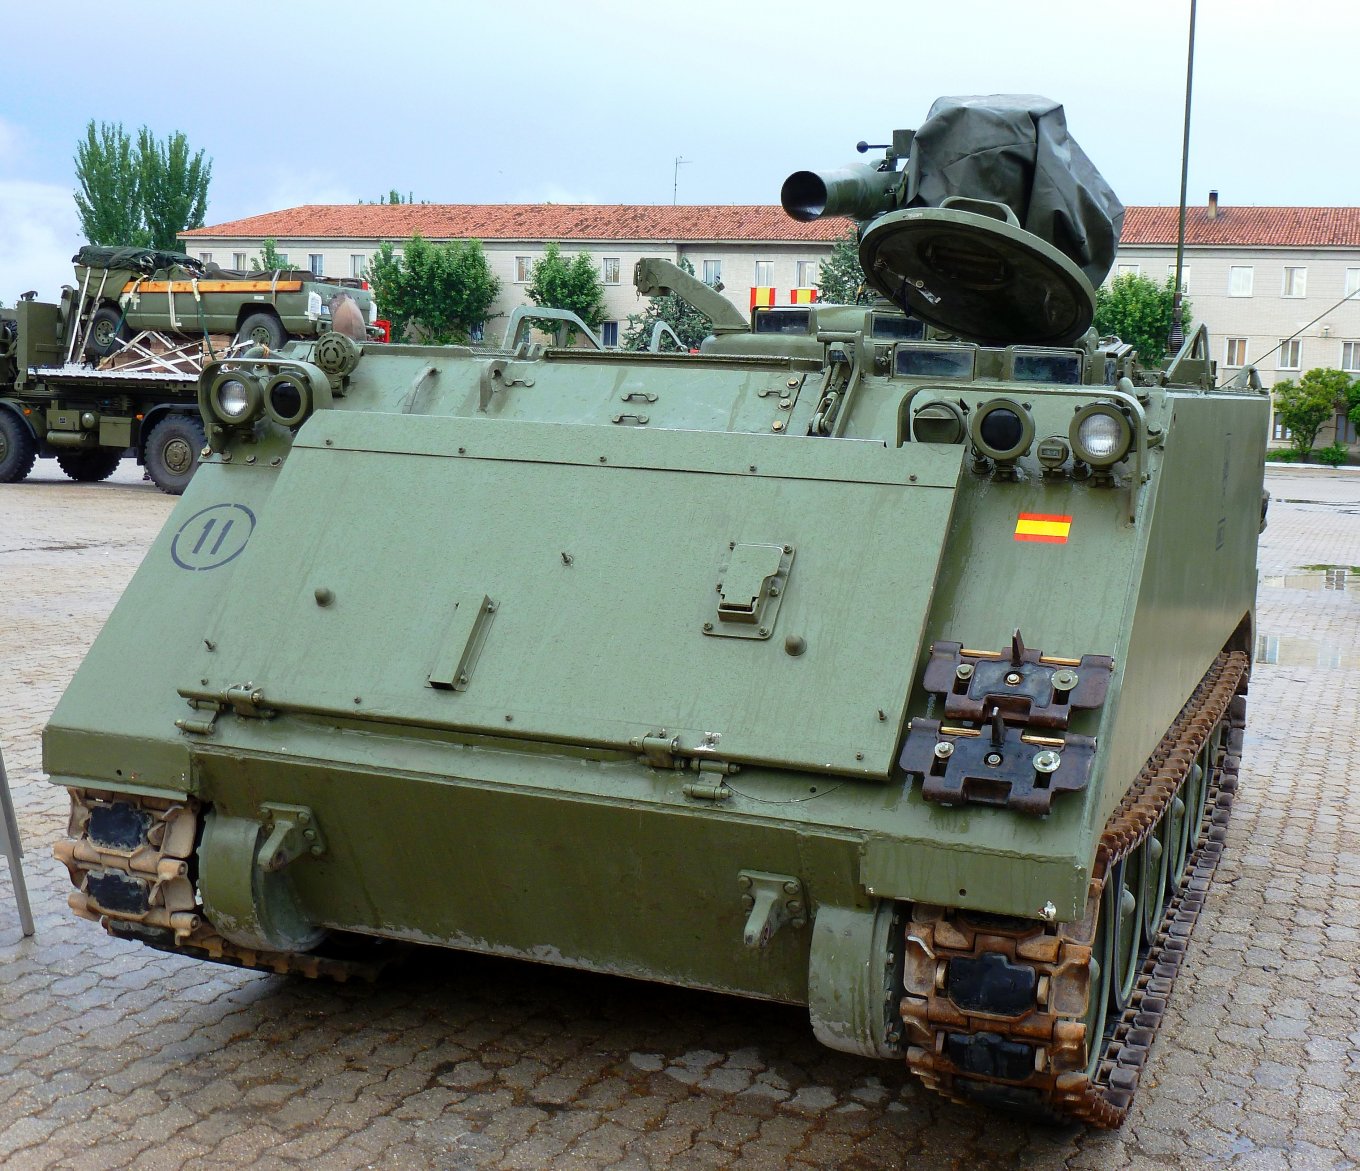 M113 armored vehicles